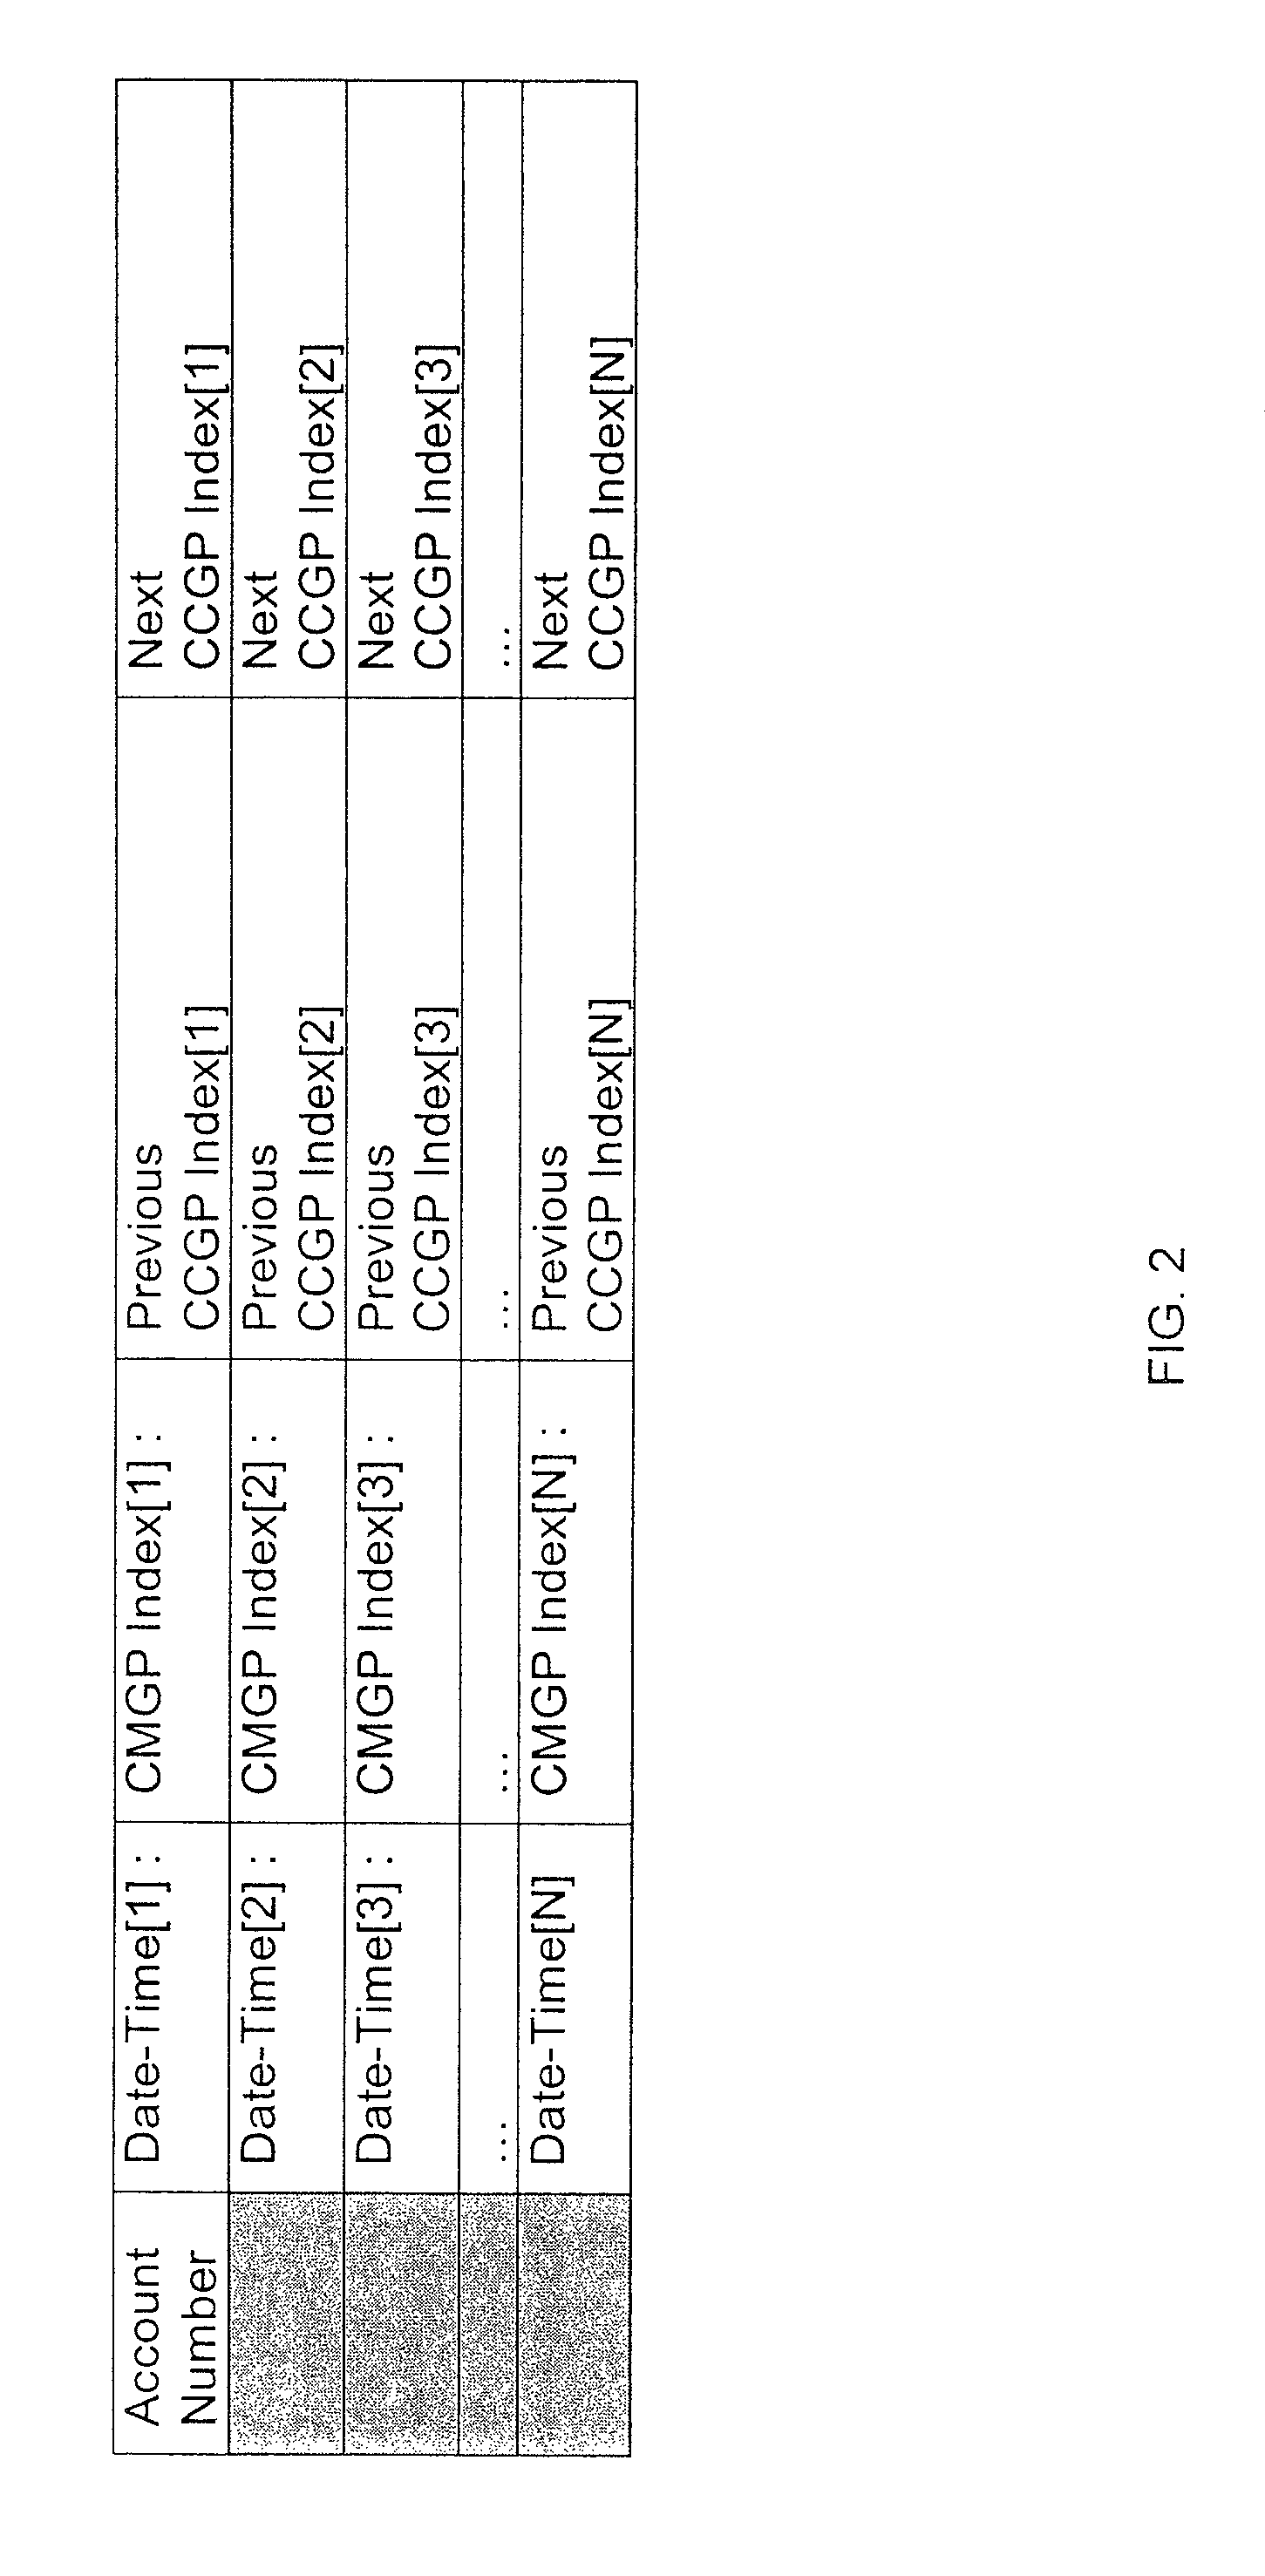 Mass compromise/point of compromise analytic detection and compromised card portfolio management system